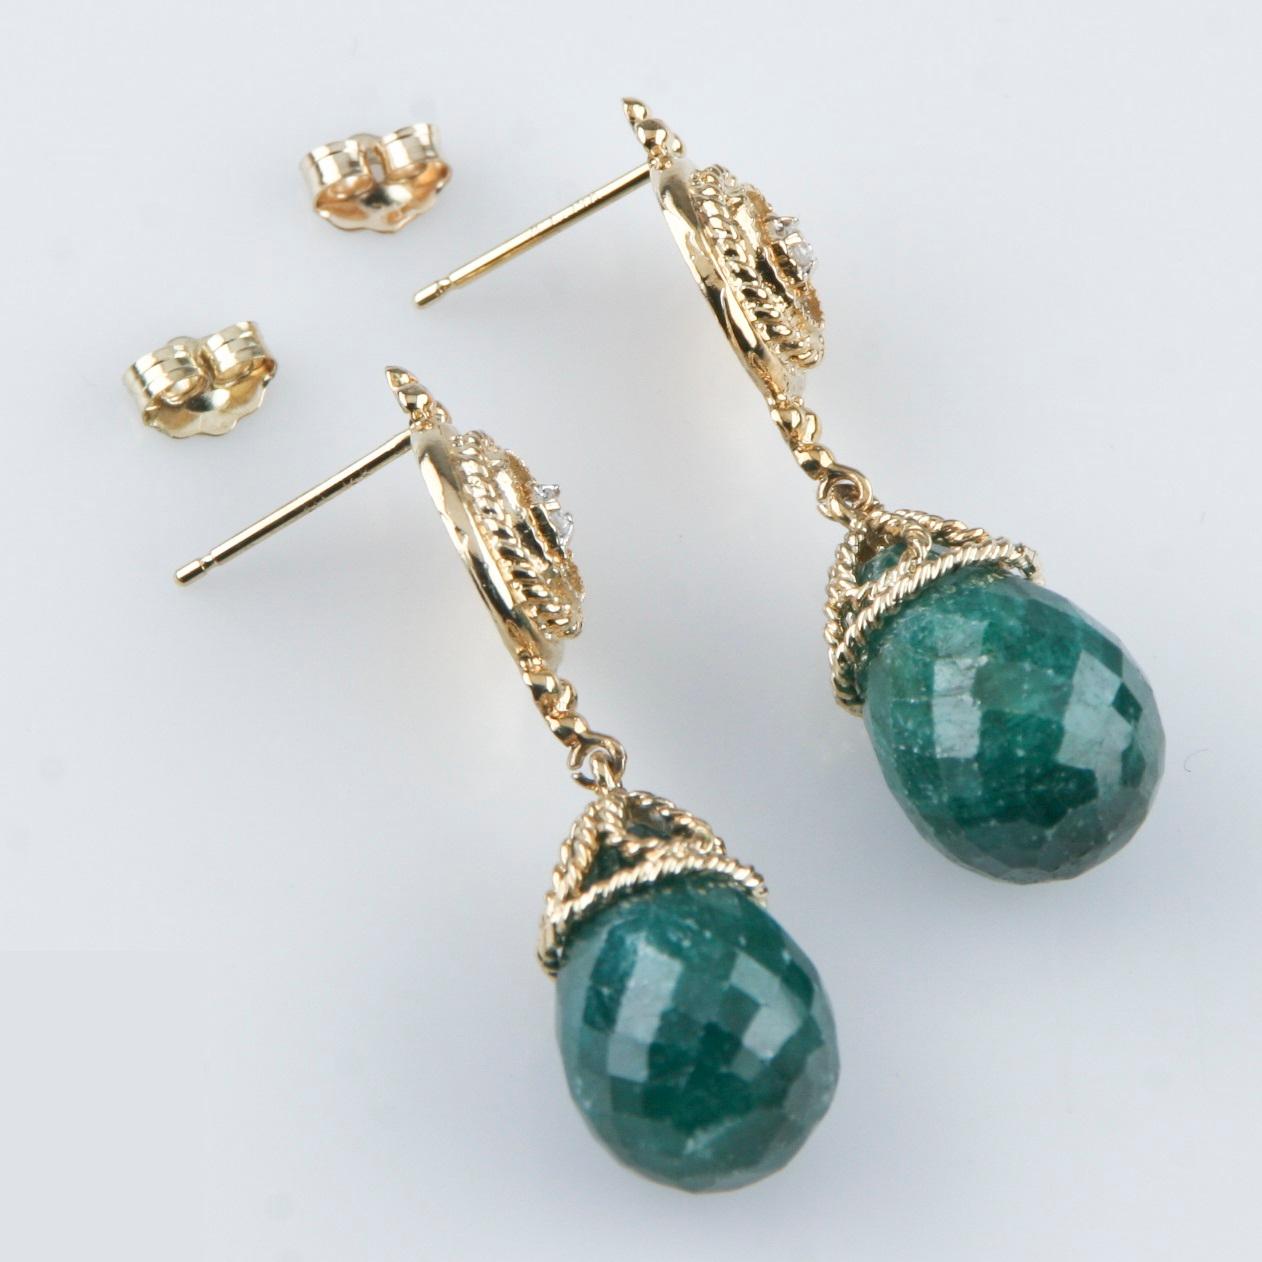 One pair electronically tested 14KT yellow gold ladies cast & assembled emerald and diamond earrings with standard backs.
Bright polish finish
Condition is good

Containing:
Two briolette cut natural emeralds
Approximate total weight of 25.00